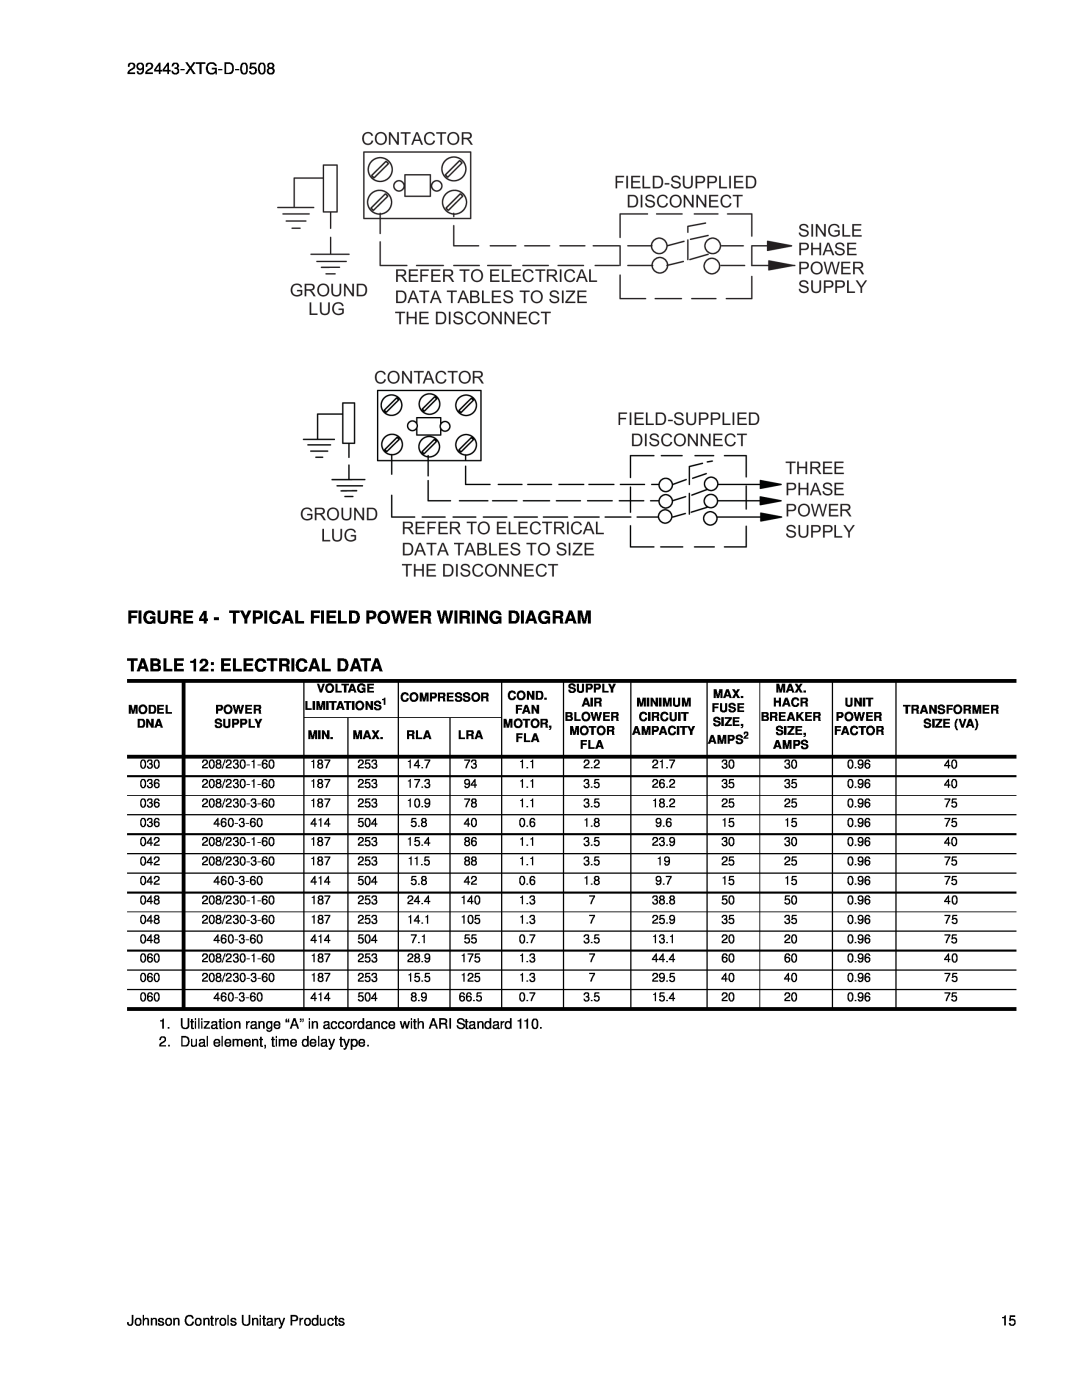 York 292443-XTG-D-0508 manual Typical Field Power Wiring Diagram, Electrical Data 